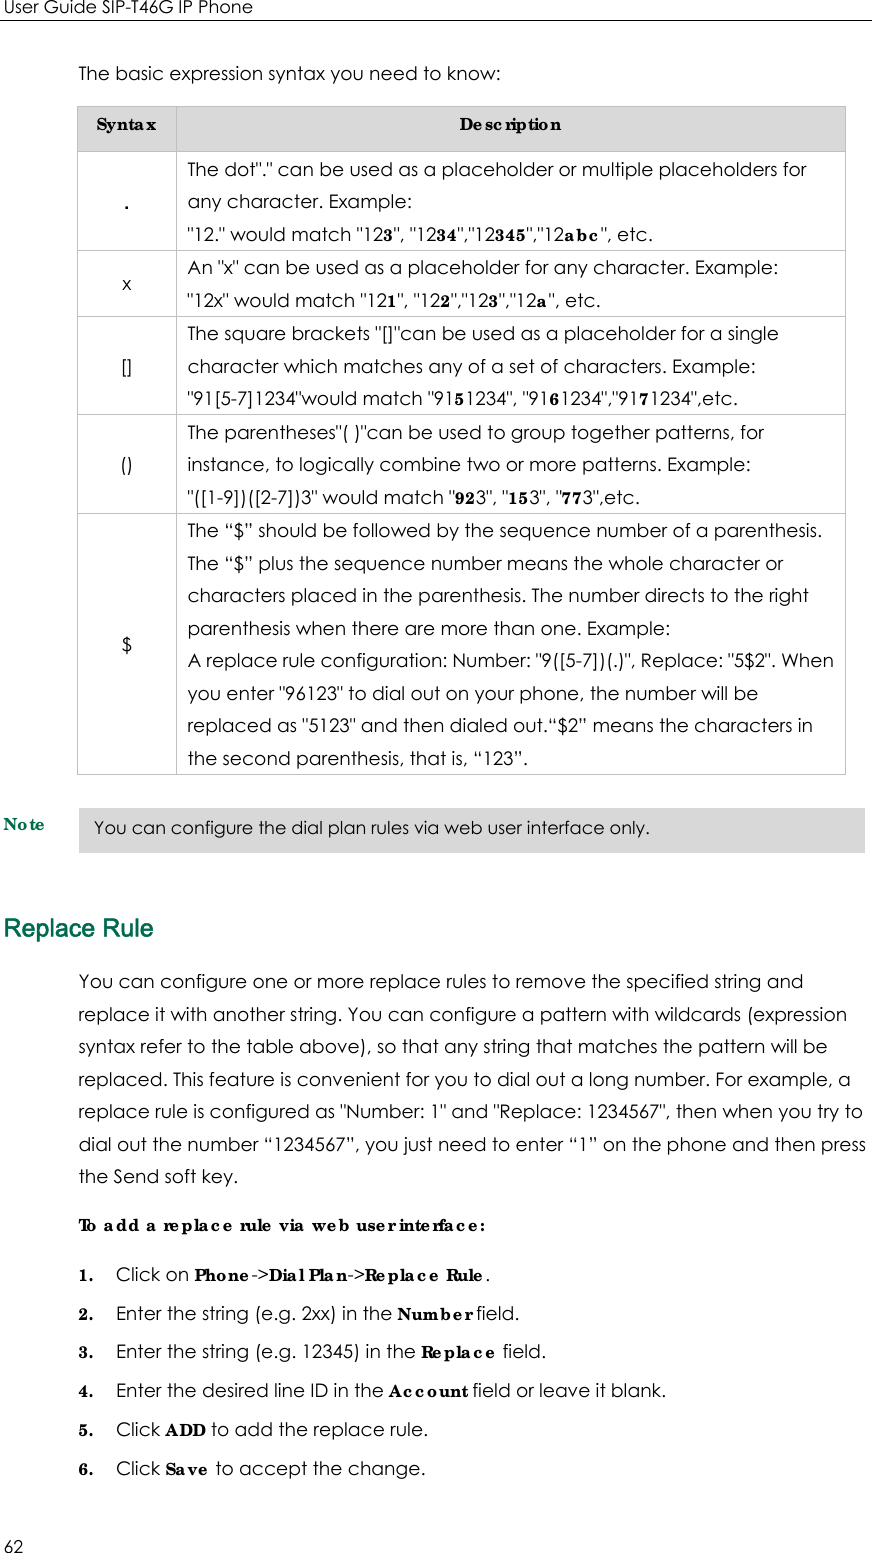 User Guide SIP-T46G IP Phone 62 The basic expression syntax you need to know: Syntax  Description . The dot&quot;.&quot; can be used as a placeholder or multiple placeholders for any character. Example: &quot;12.&quot; would match &quot;123&quot;, &quot;1234&quot;,&quot;12345&quot;,&quot;12abc&quot;, etc. x  An &quot;x&quot; can be used as a placeholder for any character. Example: &quot;12x&quot; would match &quot;121&quot;, &quot;122&quot;,&quot;123&quot;,&quot;12a&quot;, etc. [] The square brackets &quot;[]&quot;can be used as a placeholder for a single character which matches any of a set of characters. Example: &quot;91[5-7]1234&quot;would match &quot;9151234&quot;, &quot;9161234&quot;,&quot;9171234&quot;,etc. () The parentheses&quot;( )&quot;can be used to group together patterns, for instance, to logically combine two or more patterns. Example: &quot;([1-9])([2-7])3&quot; would match &quot;923&quot;, &quot;153&quot;, &quot;773&quot;,etc. $ The “$” should be followed by the sequence number of a parenthesis. The “$” plus the sequence number means the whole character or characters placed in the parenthesis. The number directs to the right parenthesis when there are more than one. Example: A replace rule configuration: Number: &quot;9([5-7])(.)&quot;, Replace: &quot;5$2&quot;. When you enter &quot;96123&quot; to dial out on your phone, the number will be replaced as &quot;5123&quot; and then dialed out.“$2” means the characters in the second parenthesis, that is, “123”. Note Replace Rule You can configure one or more replace rules to remove the specified string and replace it with another string. You can configure a pattern with wildcards (expression syntax refer to the table above), so that any string that matches the pattern will be replaced. This feature is convenient for you to dial out a long number. For example, a replace rule is configured as &quot;Number: 1&quot; and &quot;Replace: 1234567&quot;, then when you try to dial out the number “1234567”, you just need to enter “1” on the phone and then press the Send soft key. To add a replace rule via web user interface: 1. Click on Phone-&gt;Dial Plan-&gt;Replace Rule. 2. Enter the string (e.g. 2xx) in the Number field. 3. Enter the string (e.g. 12345) in the Replace field. 4. Enter the desired line ID in the Account field or leave it blank. 5. Click ADD to add the replace rule. 6. Click Save to accept the change. You can configure the dial plan rules via web user interface only. 